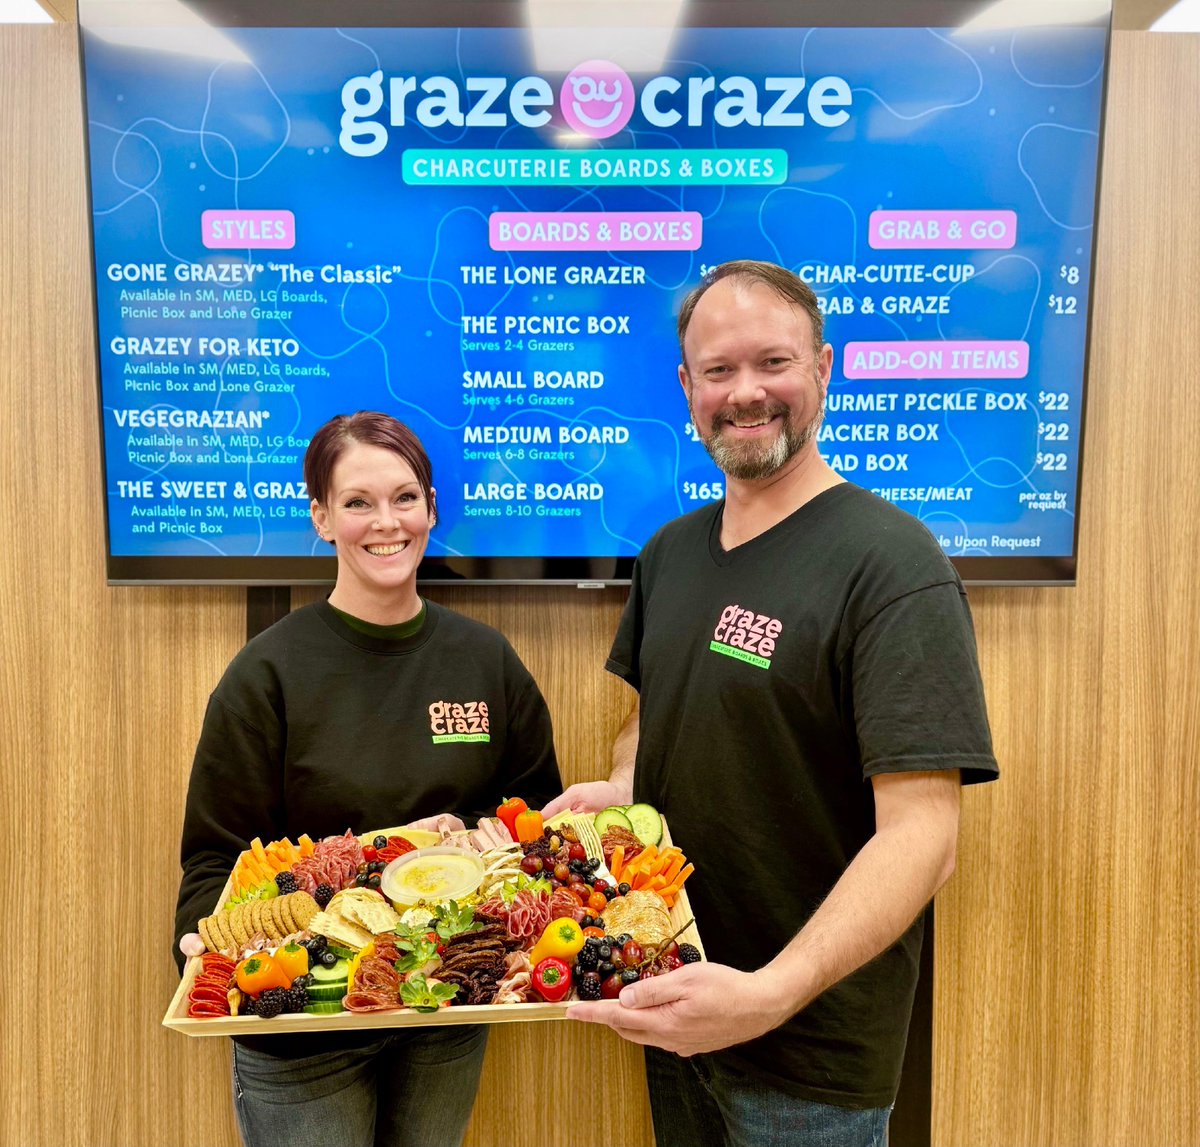 Announcing the grand opening of our newest Florida location by the fantastic Paul and Jocelyn Sanders! Gulf Breeze marks our sixth location in the Sunshine State. Welcome to the Graze Craze family! 🌴 #GrazeCrazeFlorida #GulfBreezeFoodie #FloridaFlavor # CharcuterieLove